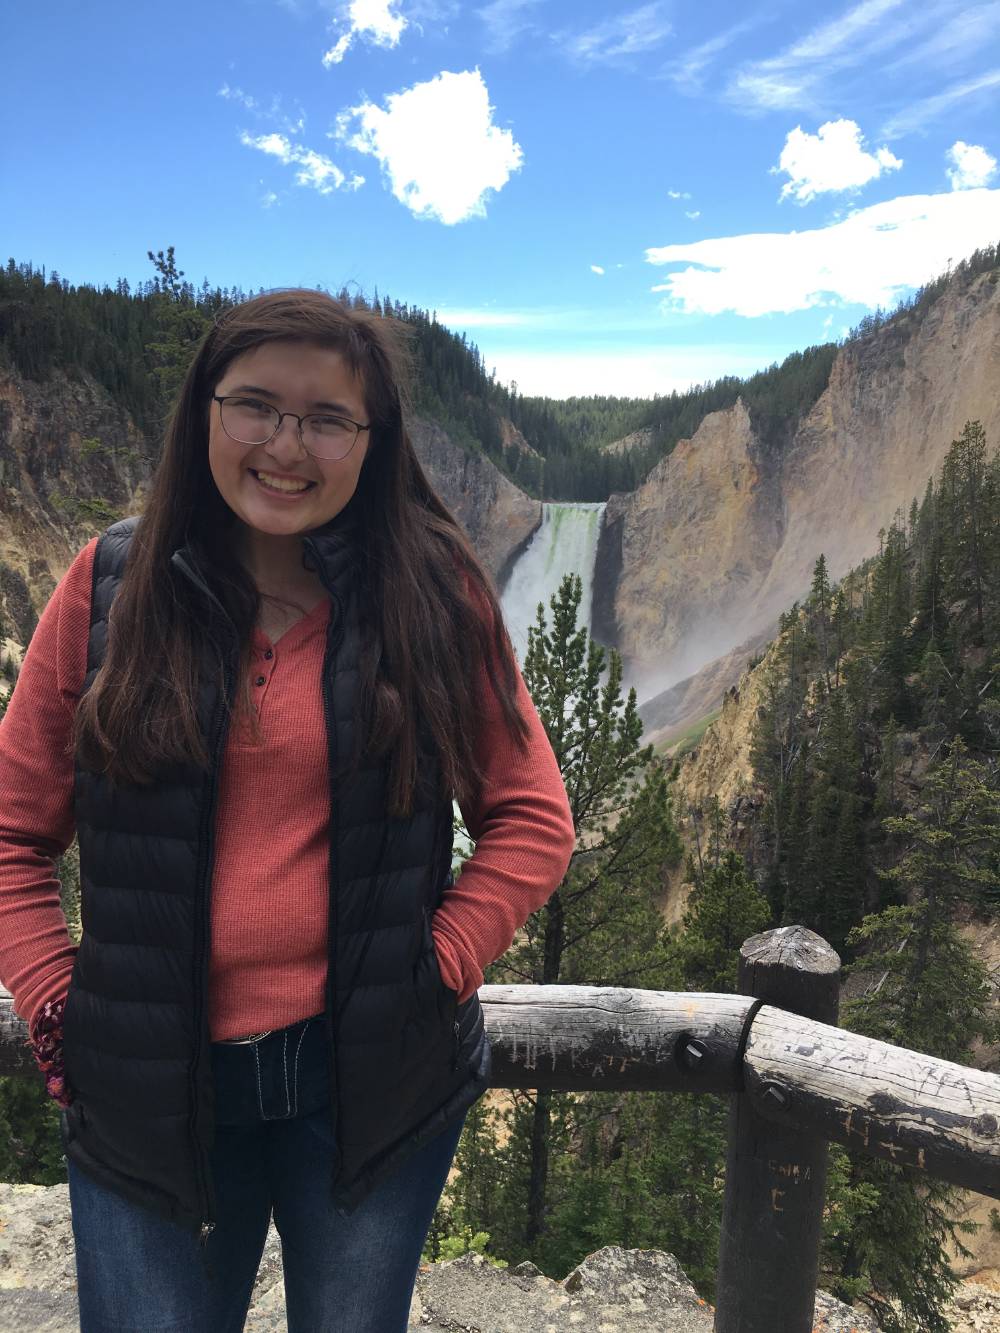 Emily Pease is a GEAR UP Student from Lodge Grass, MT